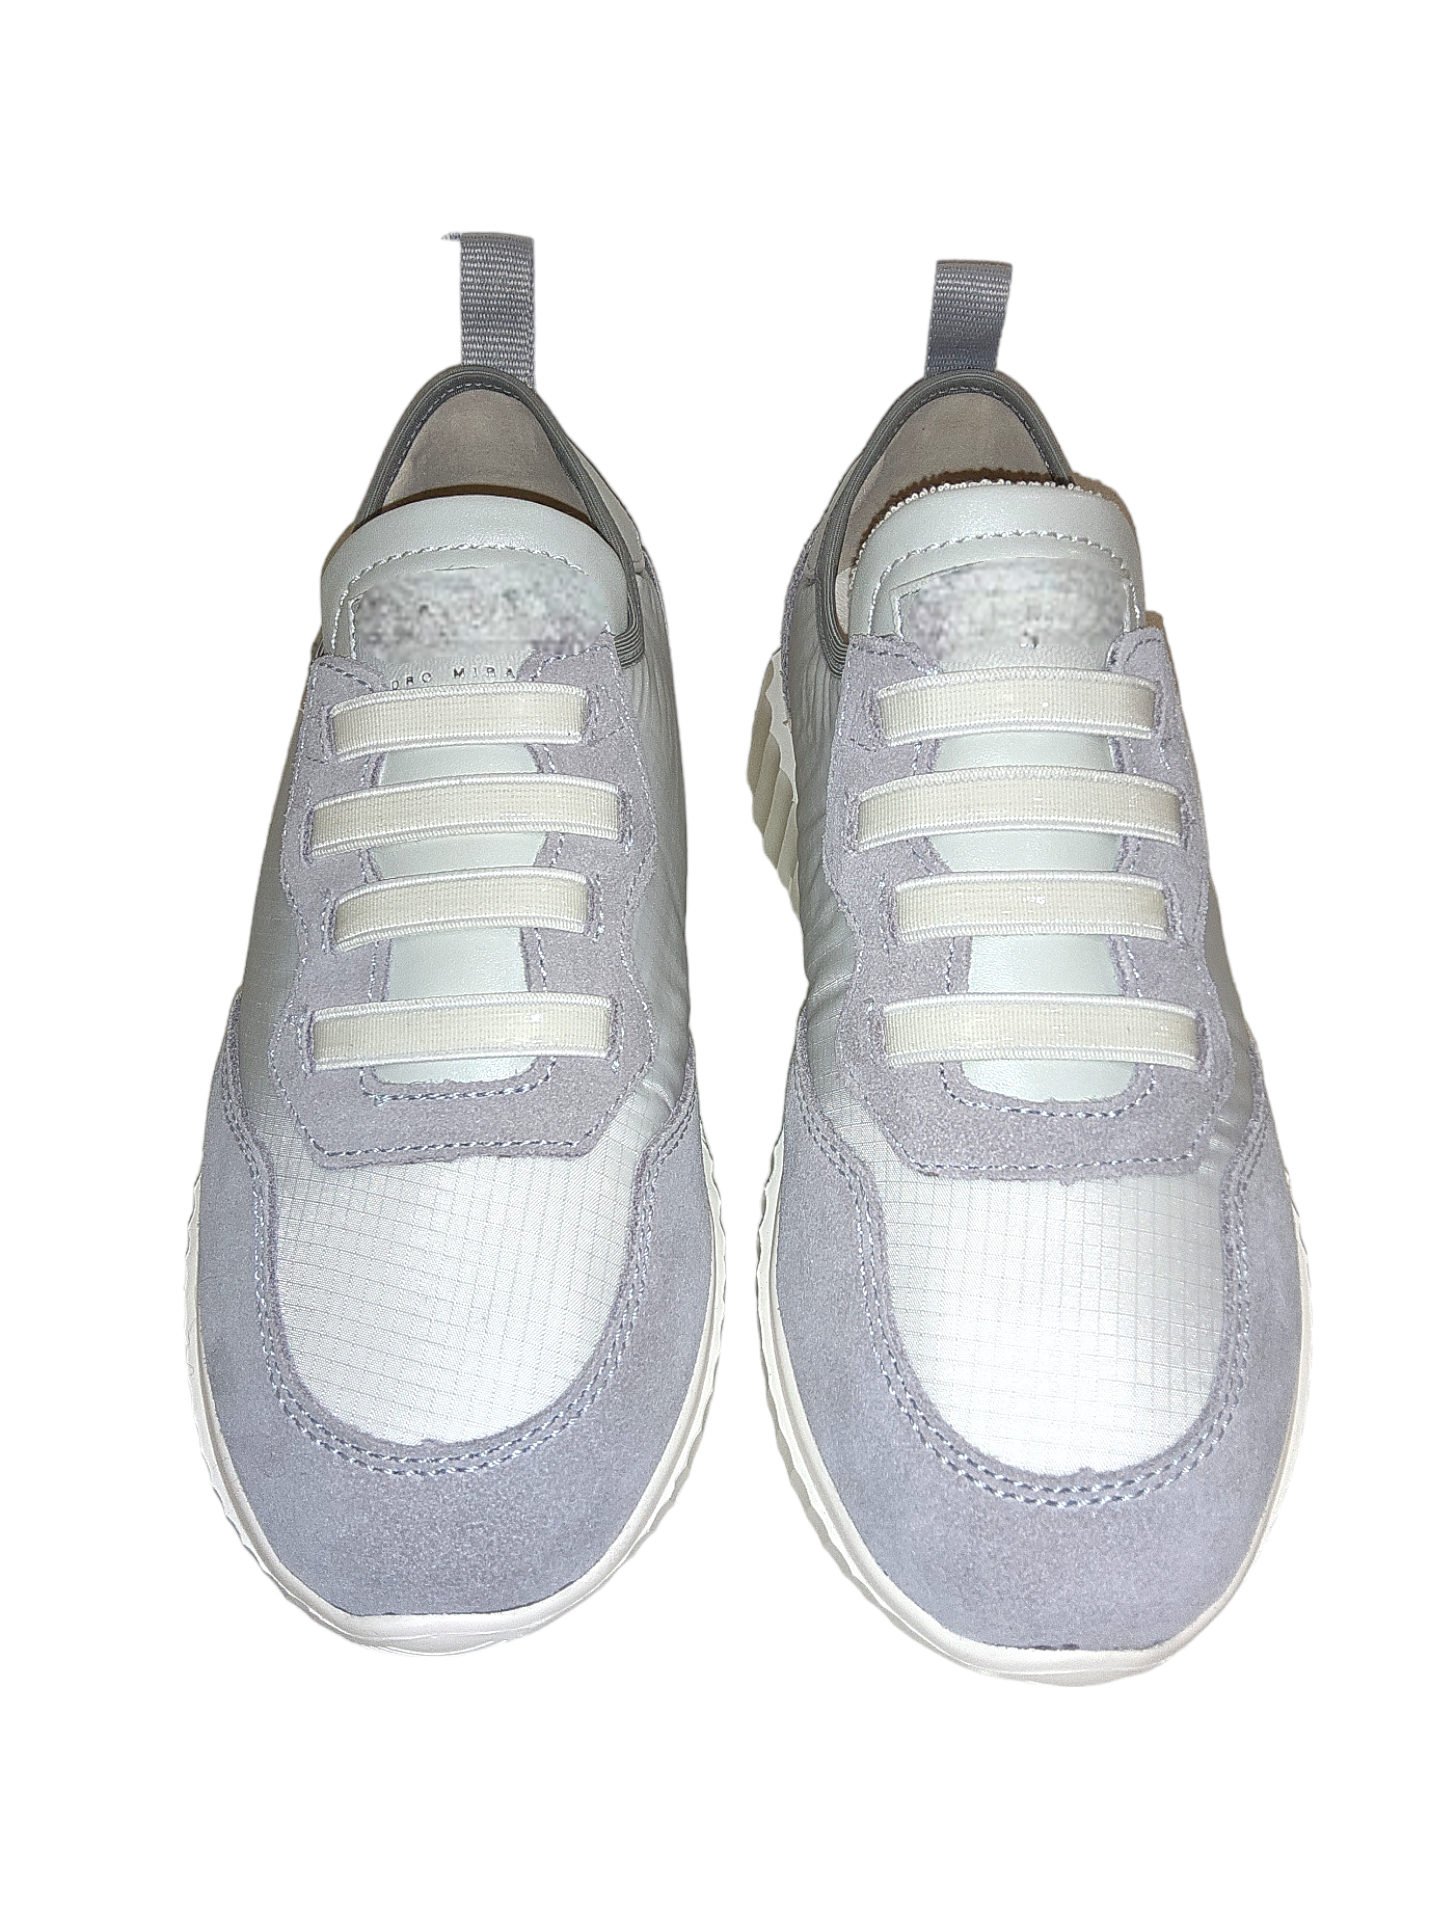 White and grey sneakers